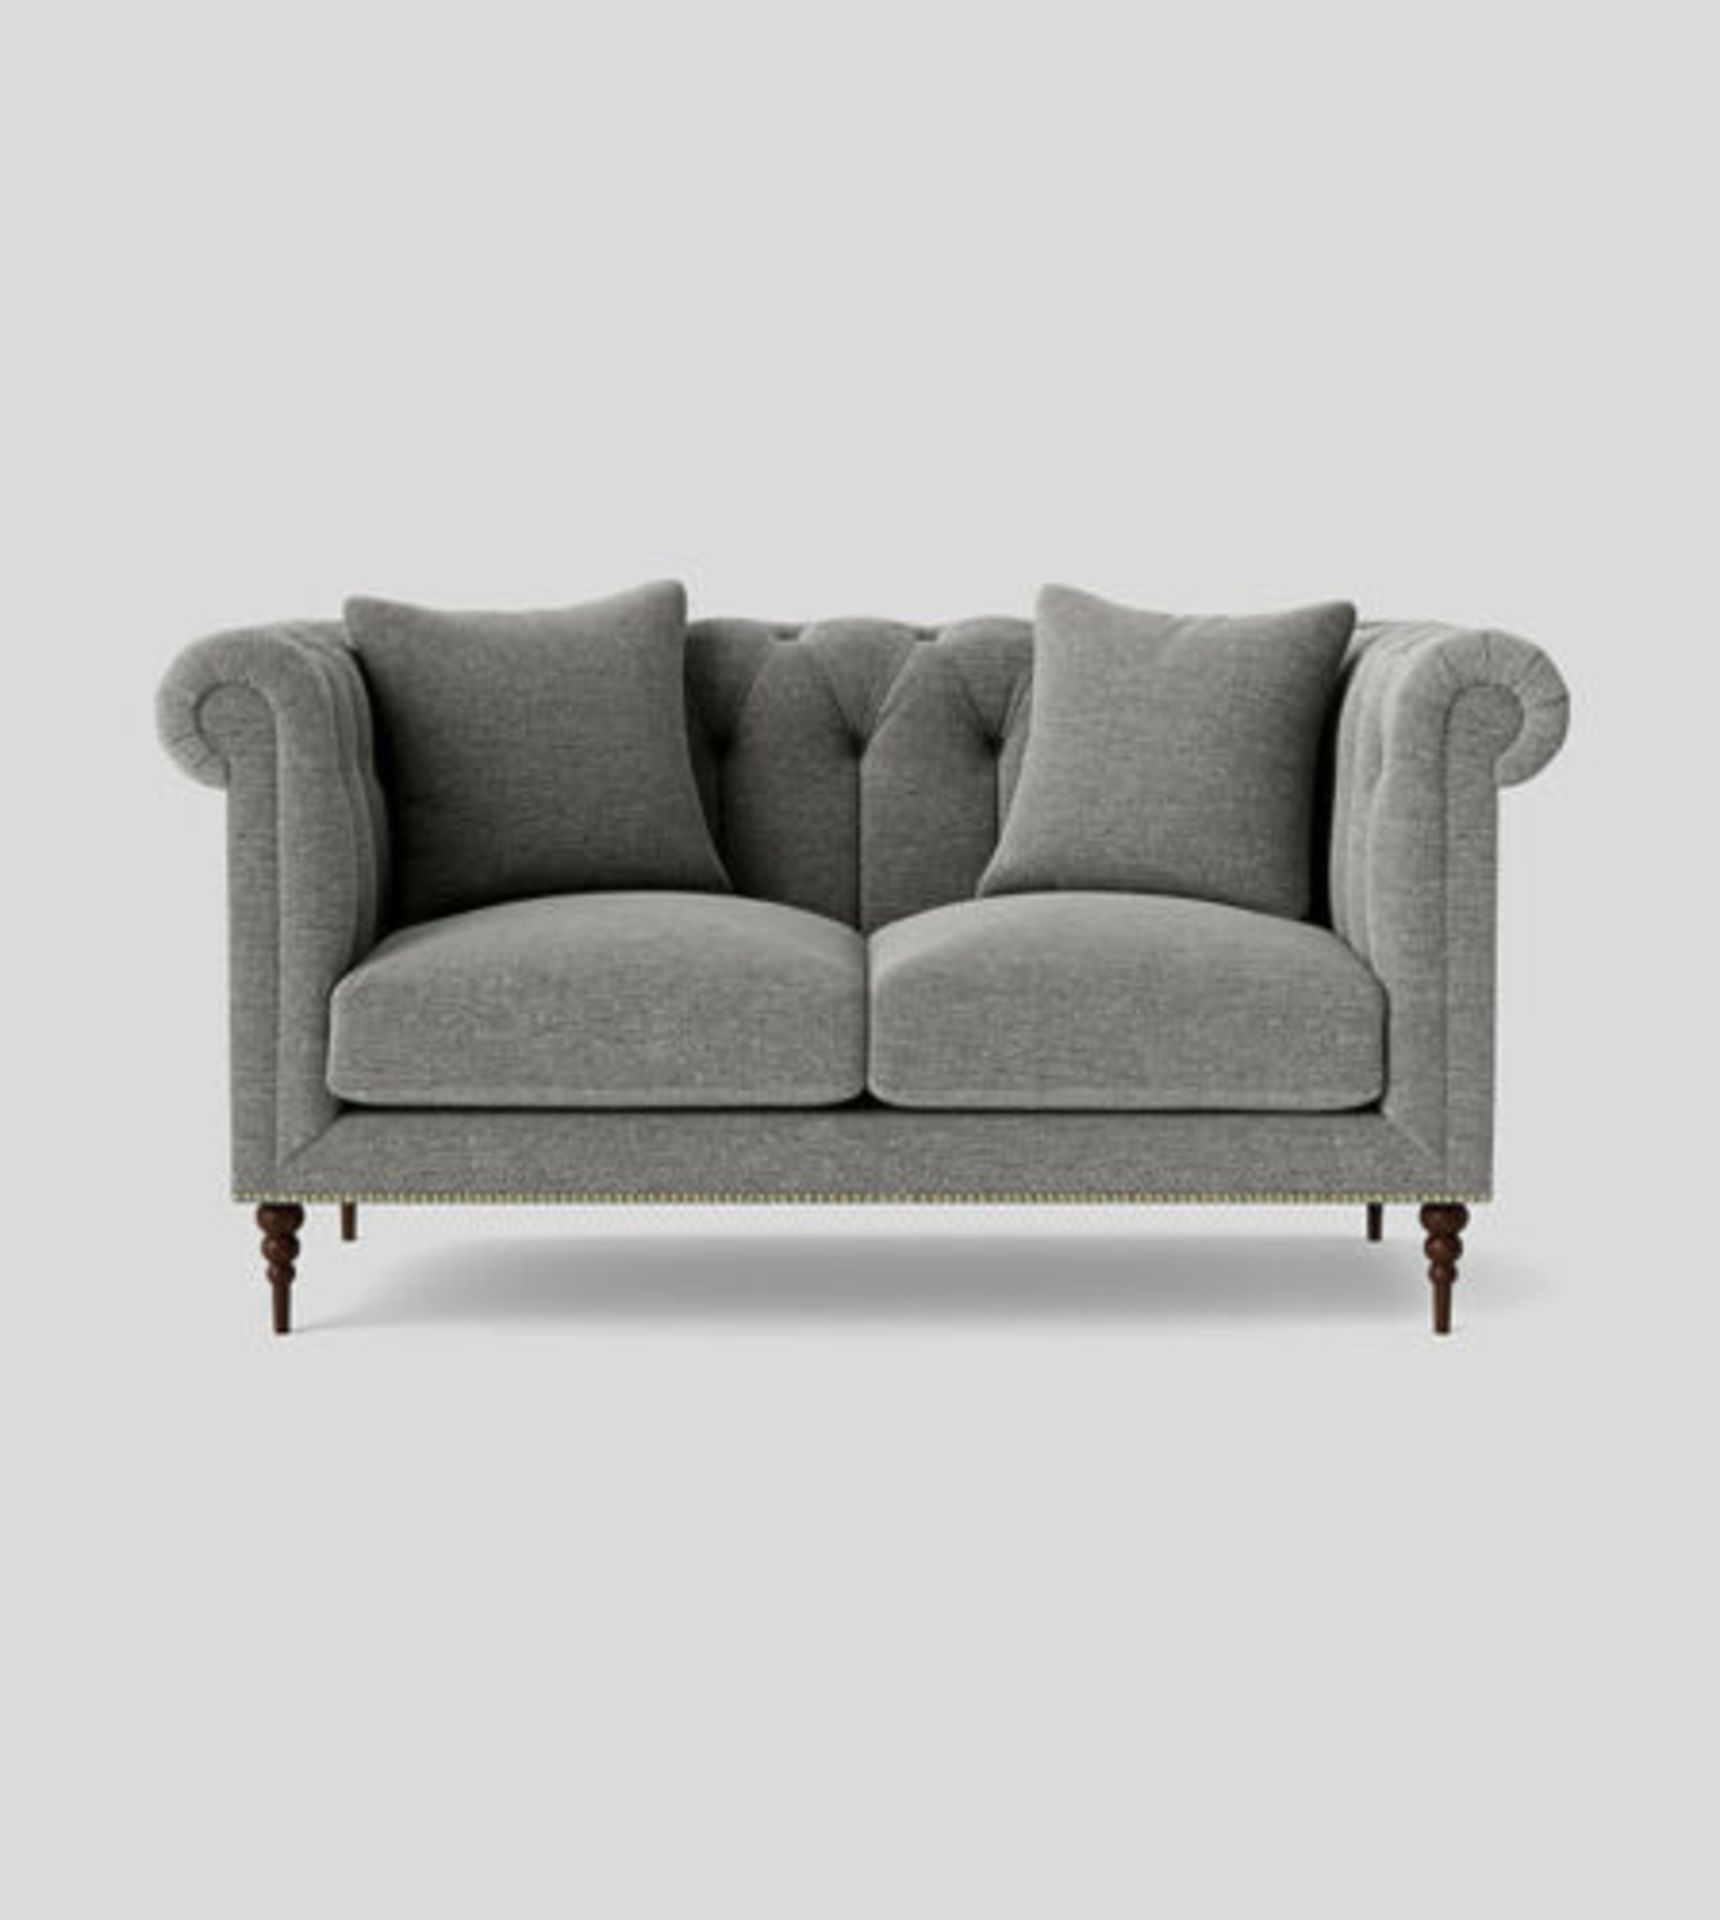 Swoon Milward House Weave Two-seater Sofa in Thunder Dark - RRP ¶œ1499 - This product has been